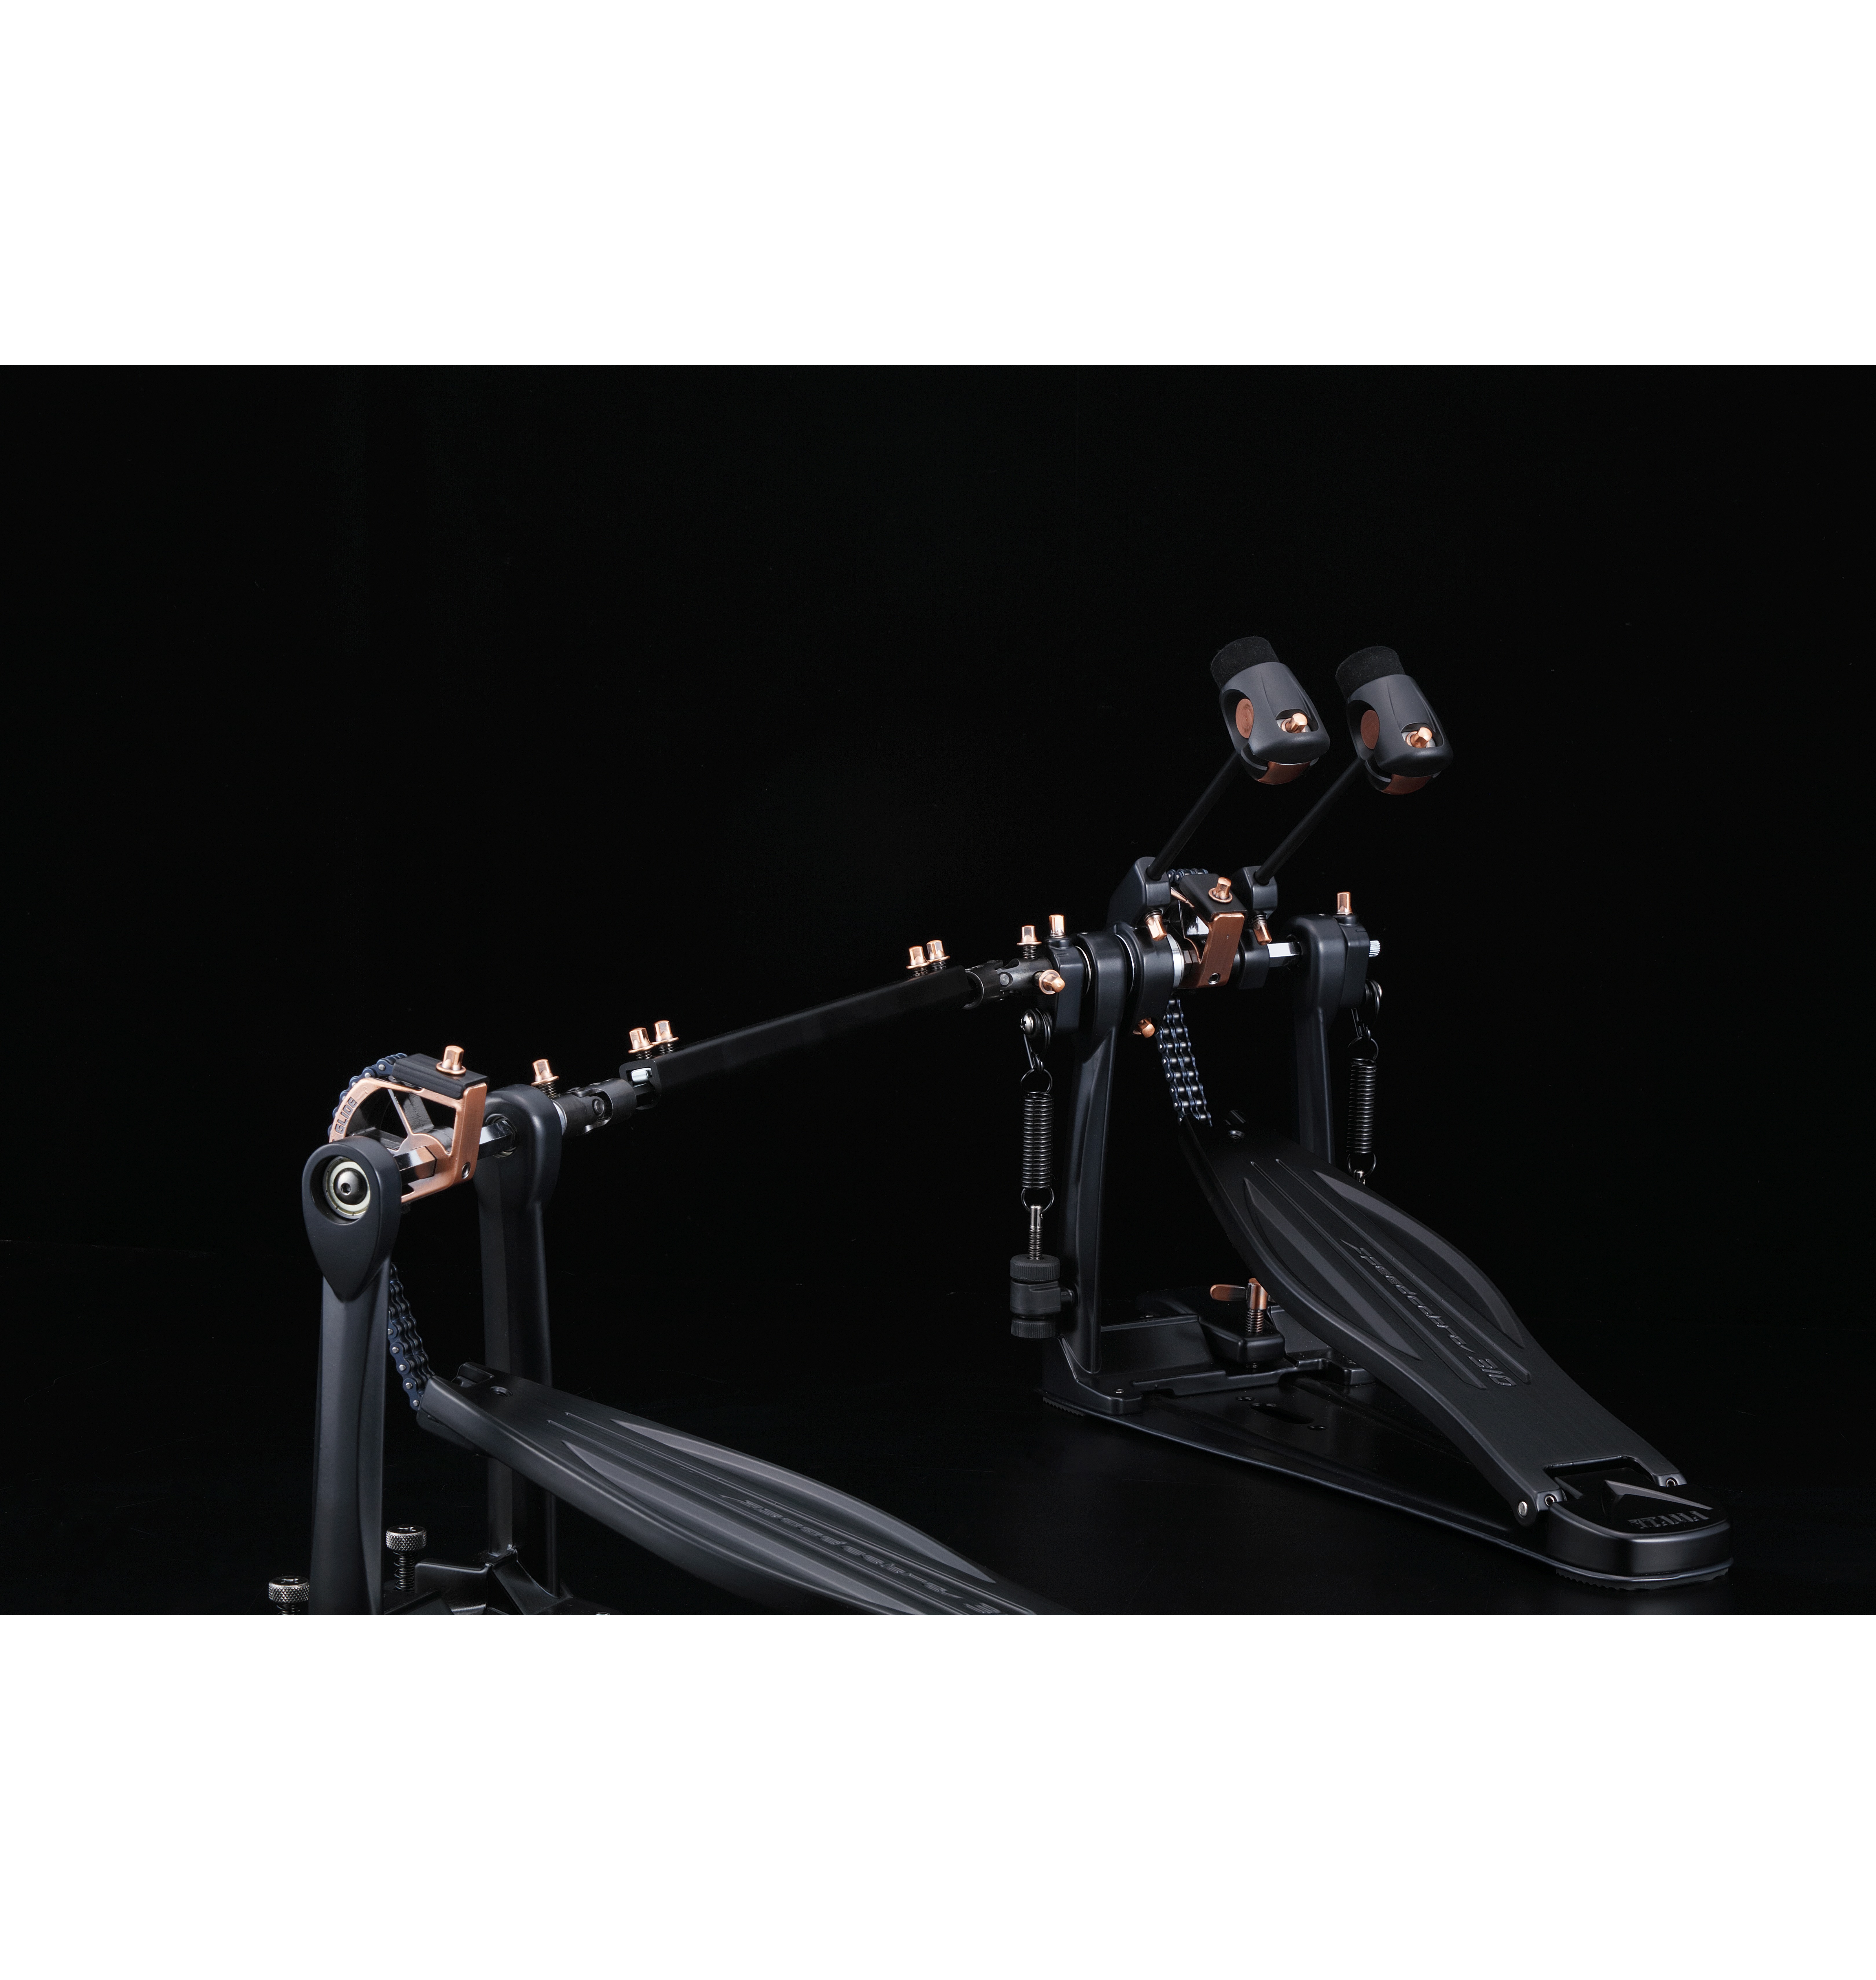 TAMA Limited Double Pedal Speed Cobra 310 - Black & Copper